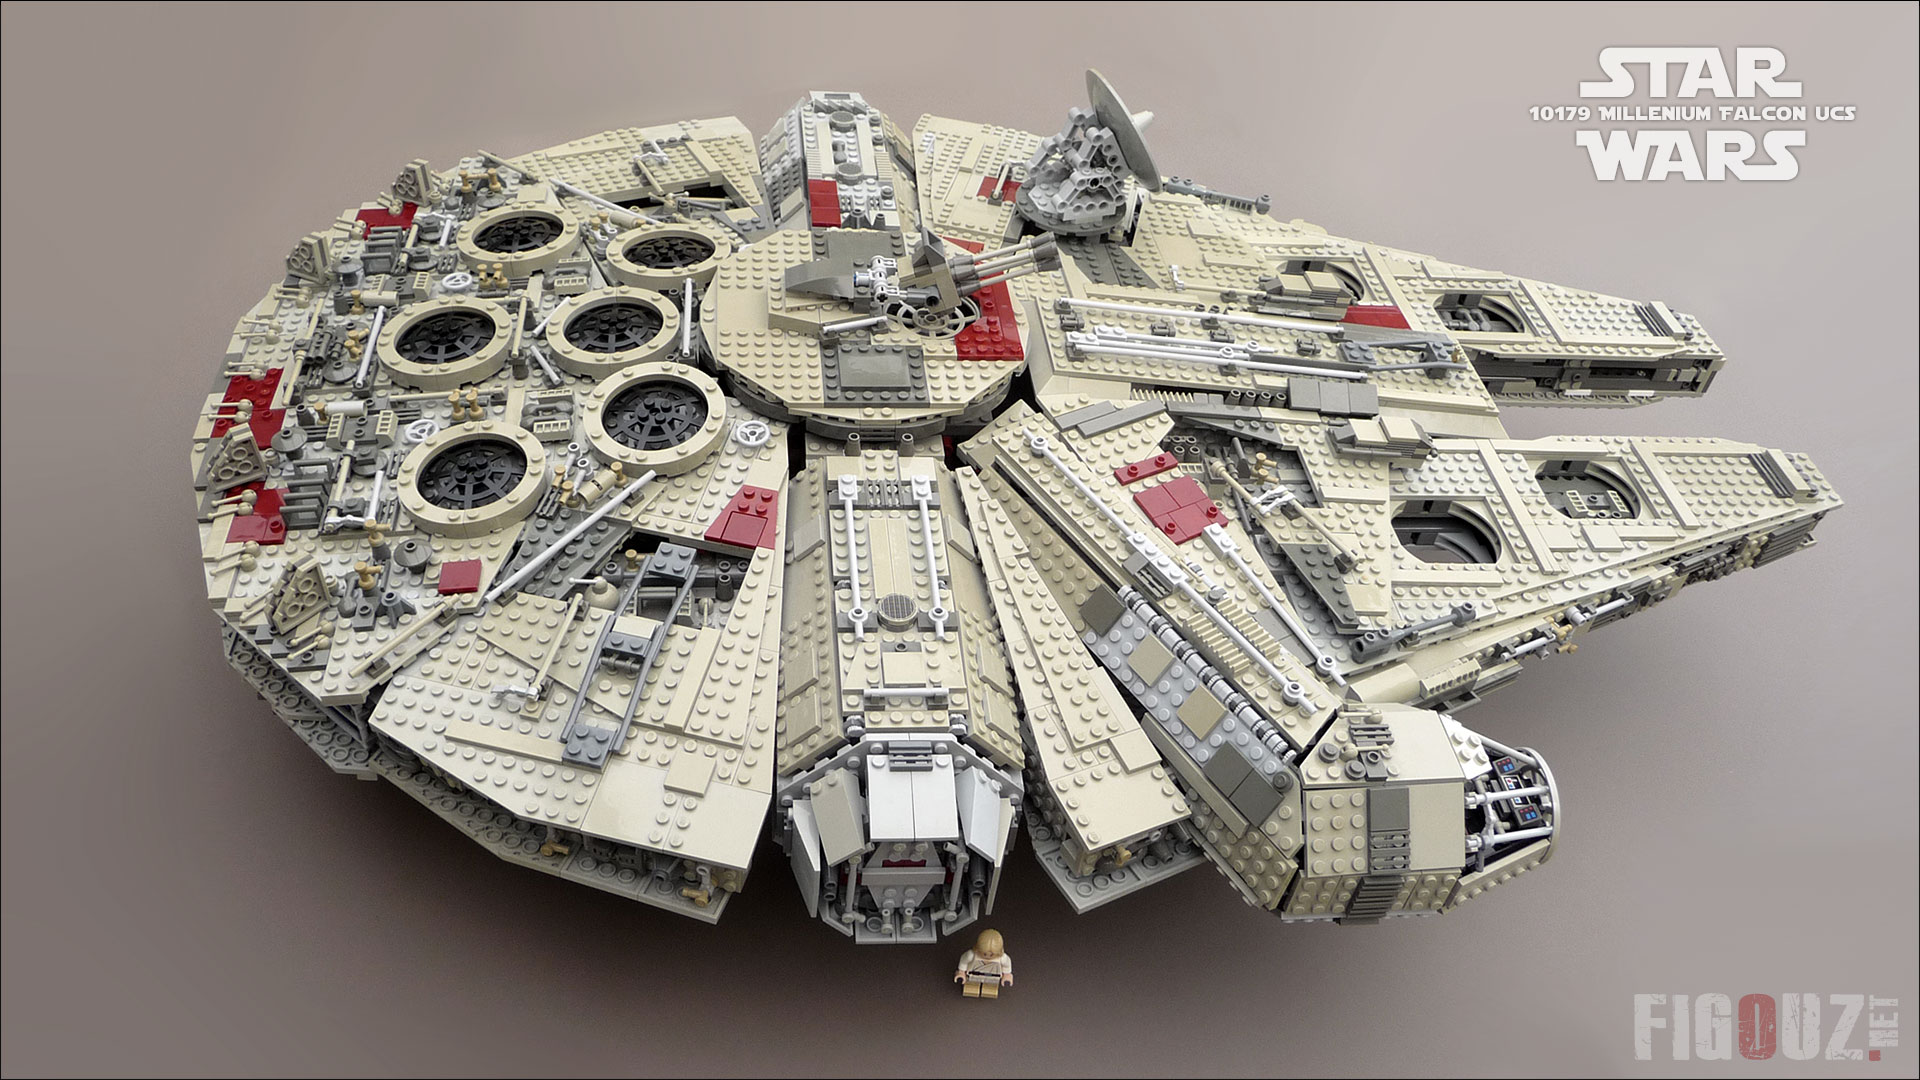 Lego 10179 Millenium Falcon UCS - Lego Star Wars Ultimate Collector Series